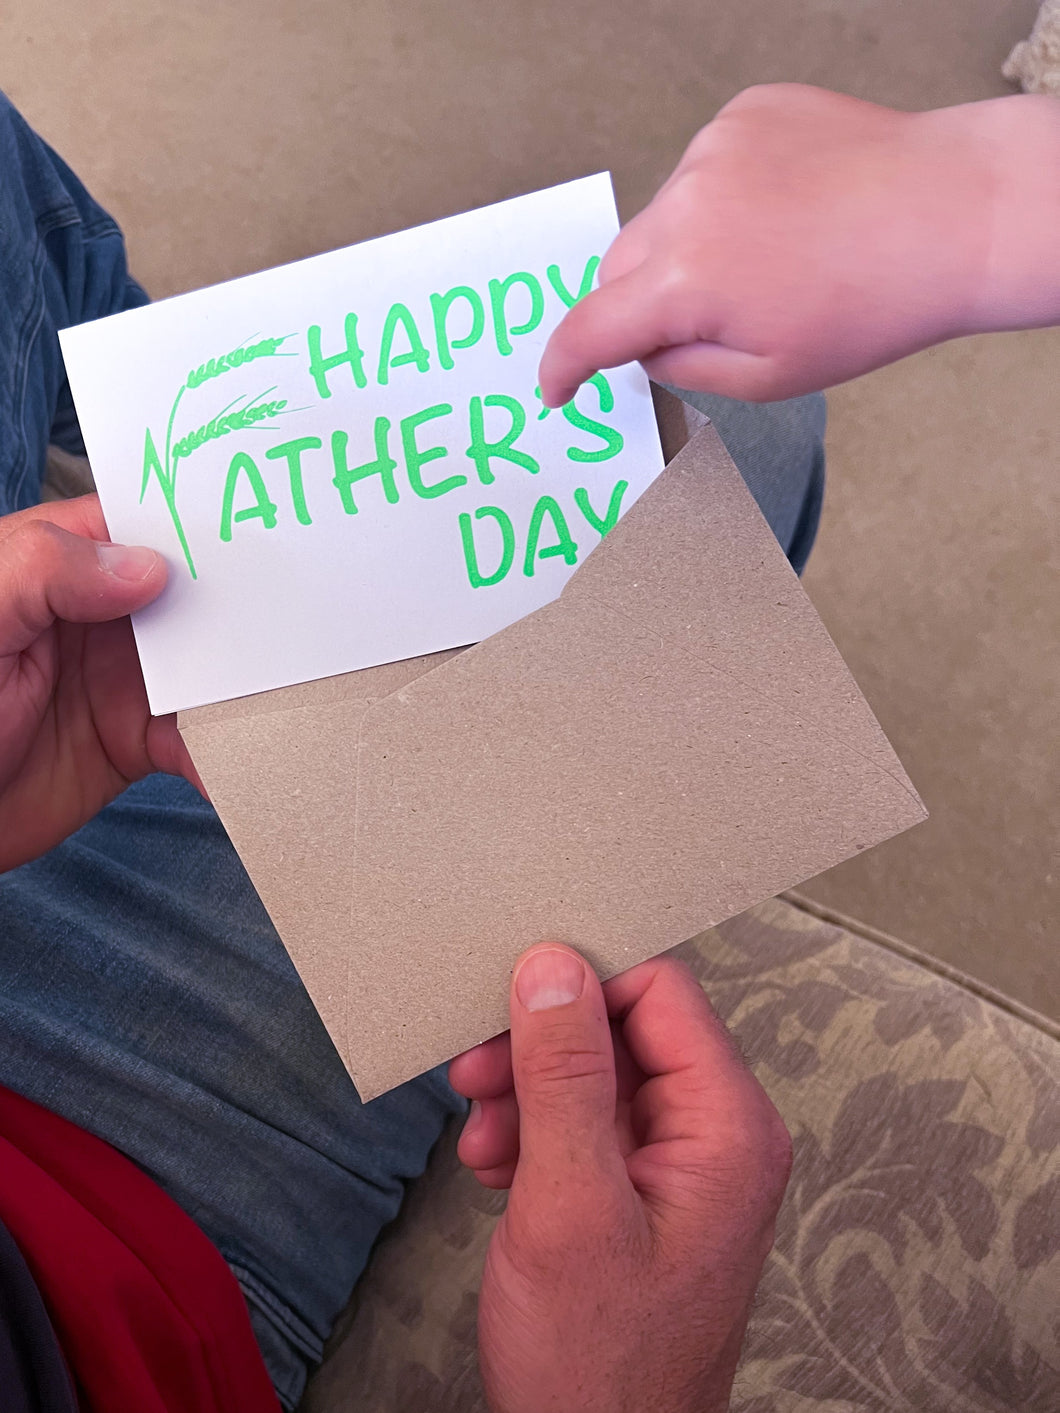 HAPPY CROPPING FATHER'S DAY - Bright Green